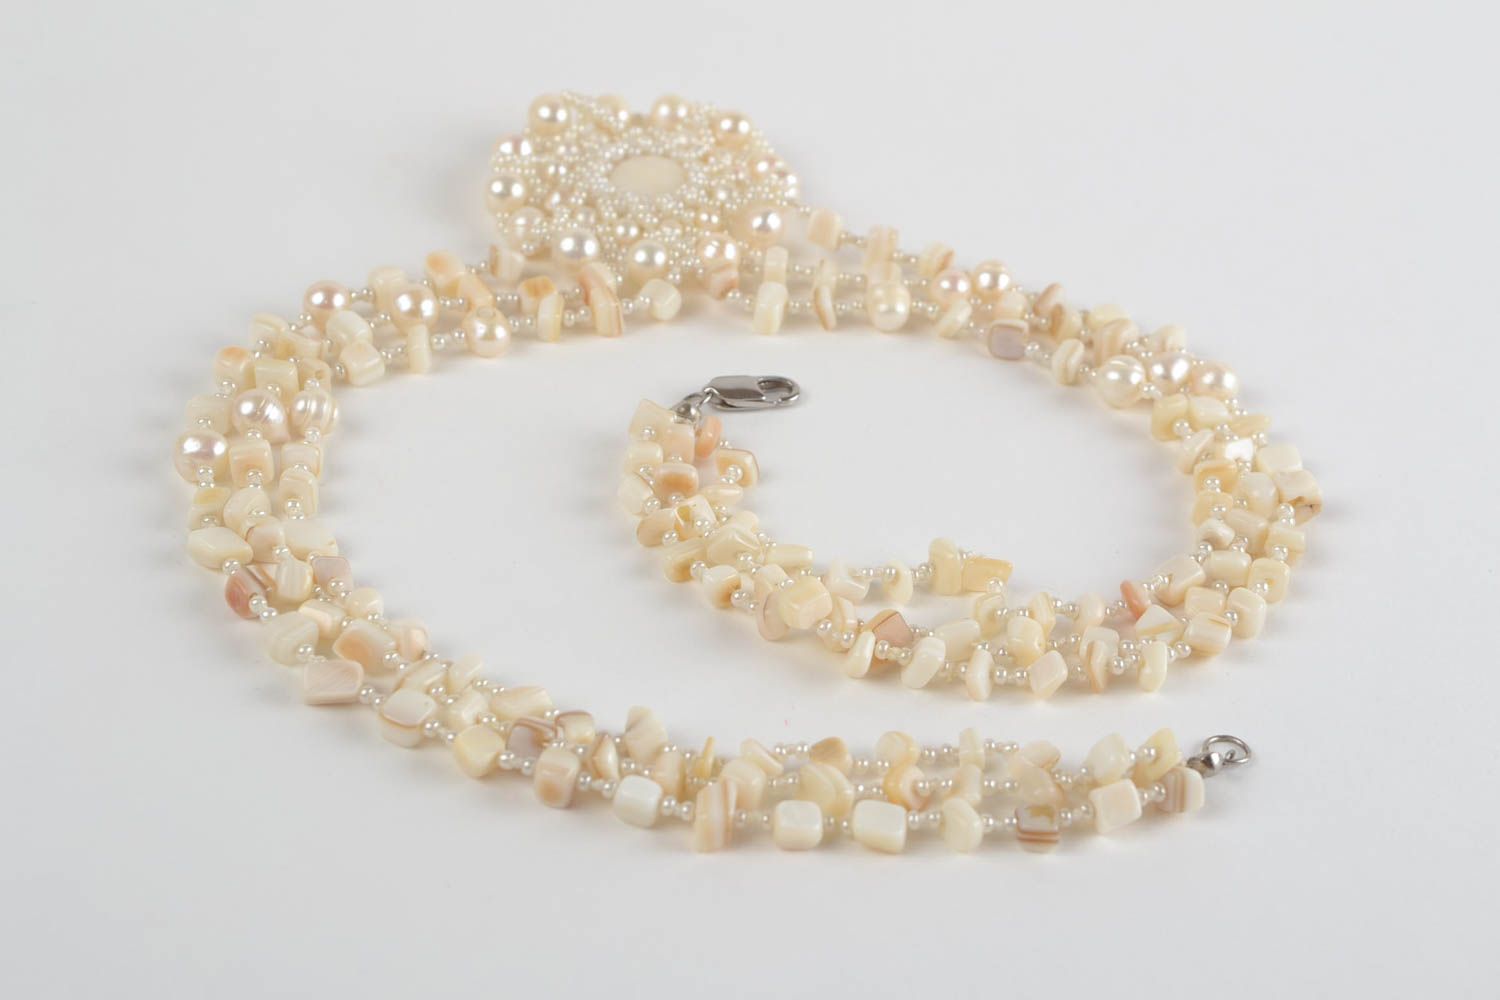 Beautiful gentle handmade necklace woven of beads and natural stone photo 4